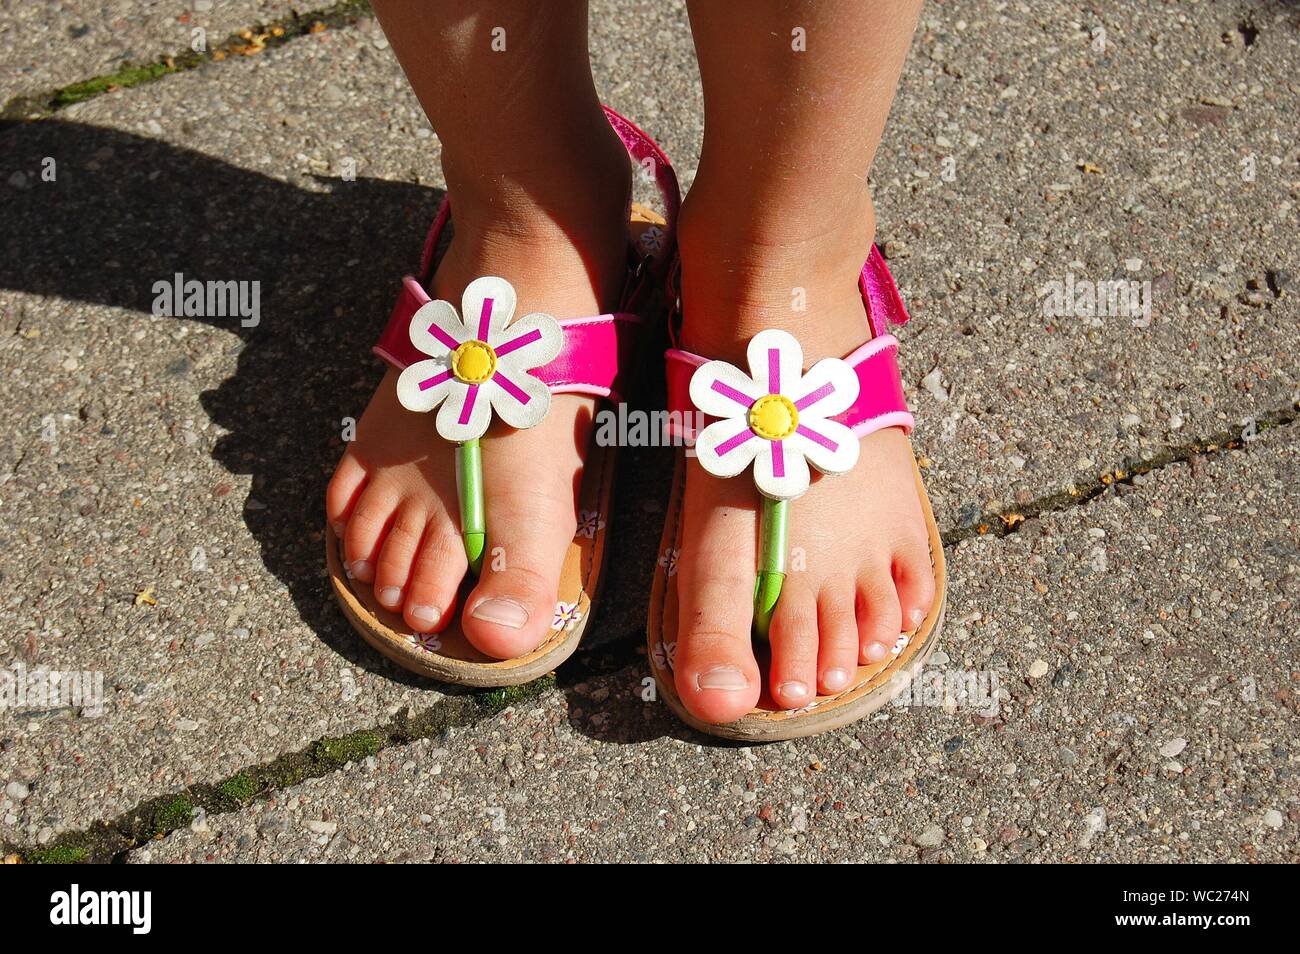 Girls Feet In Sandals High Resolution Stock Photography and Images - Alamy